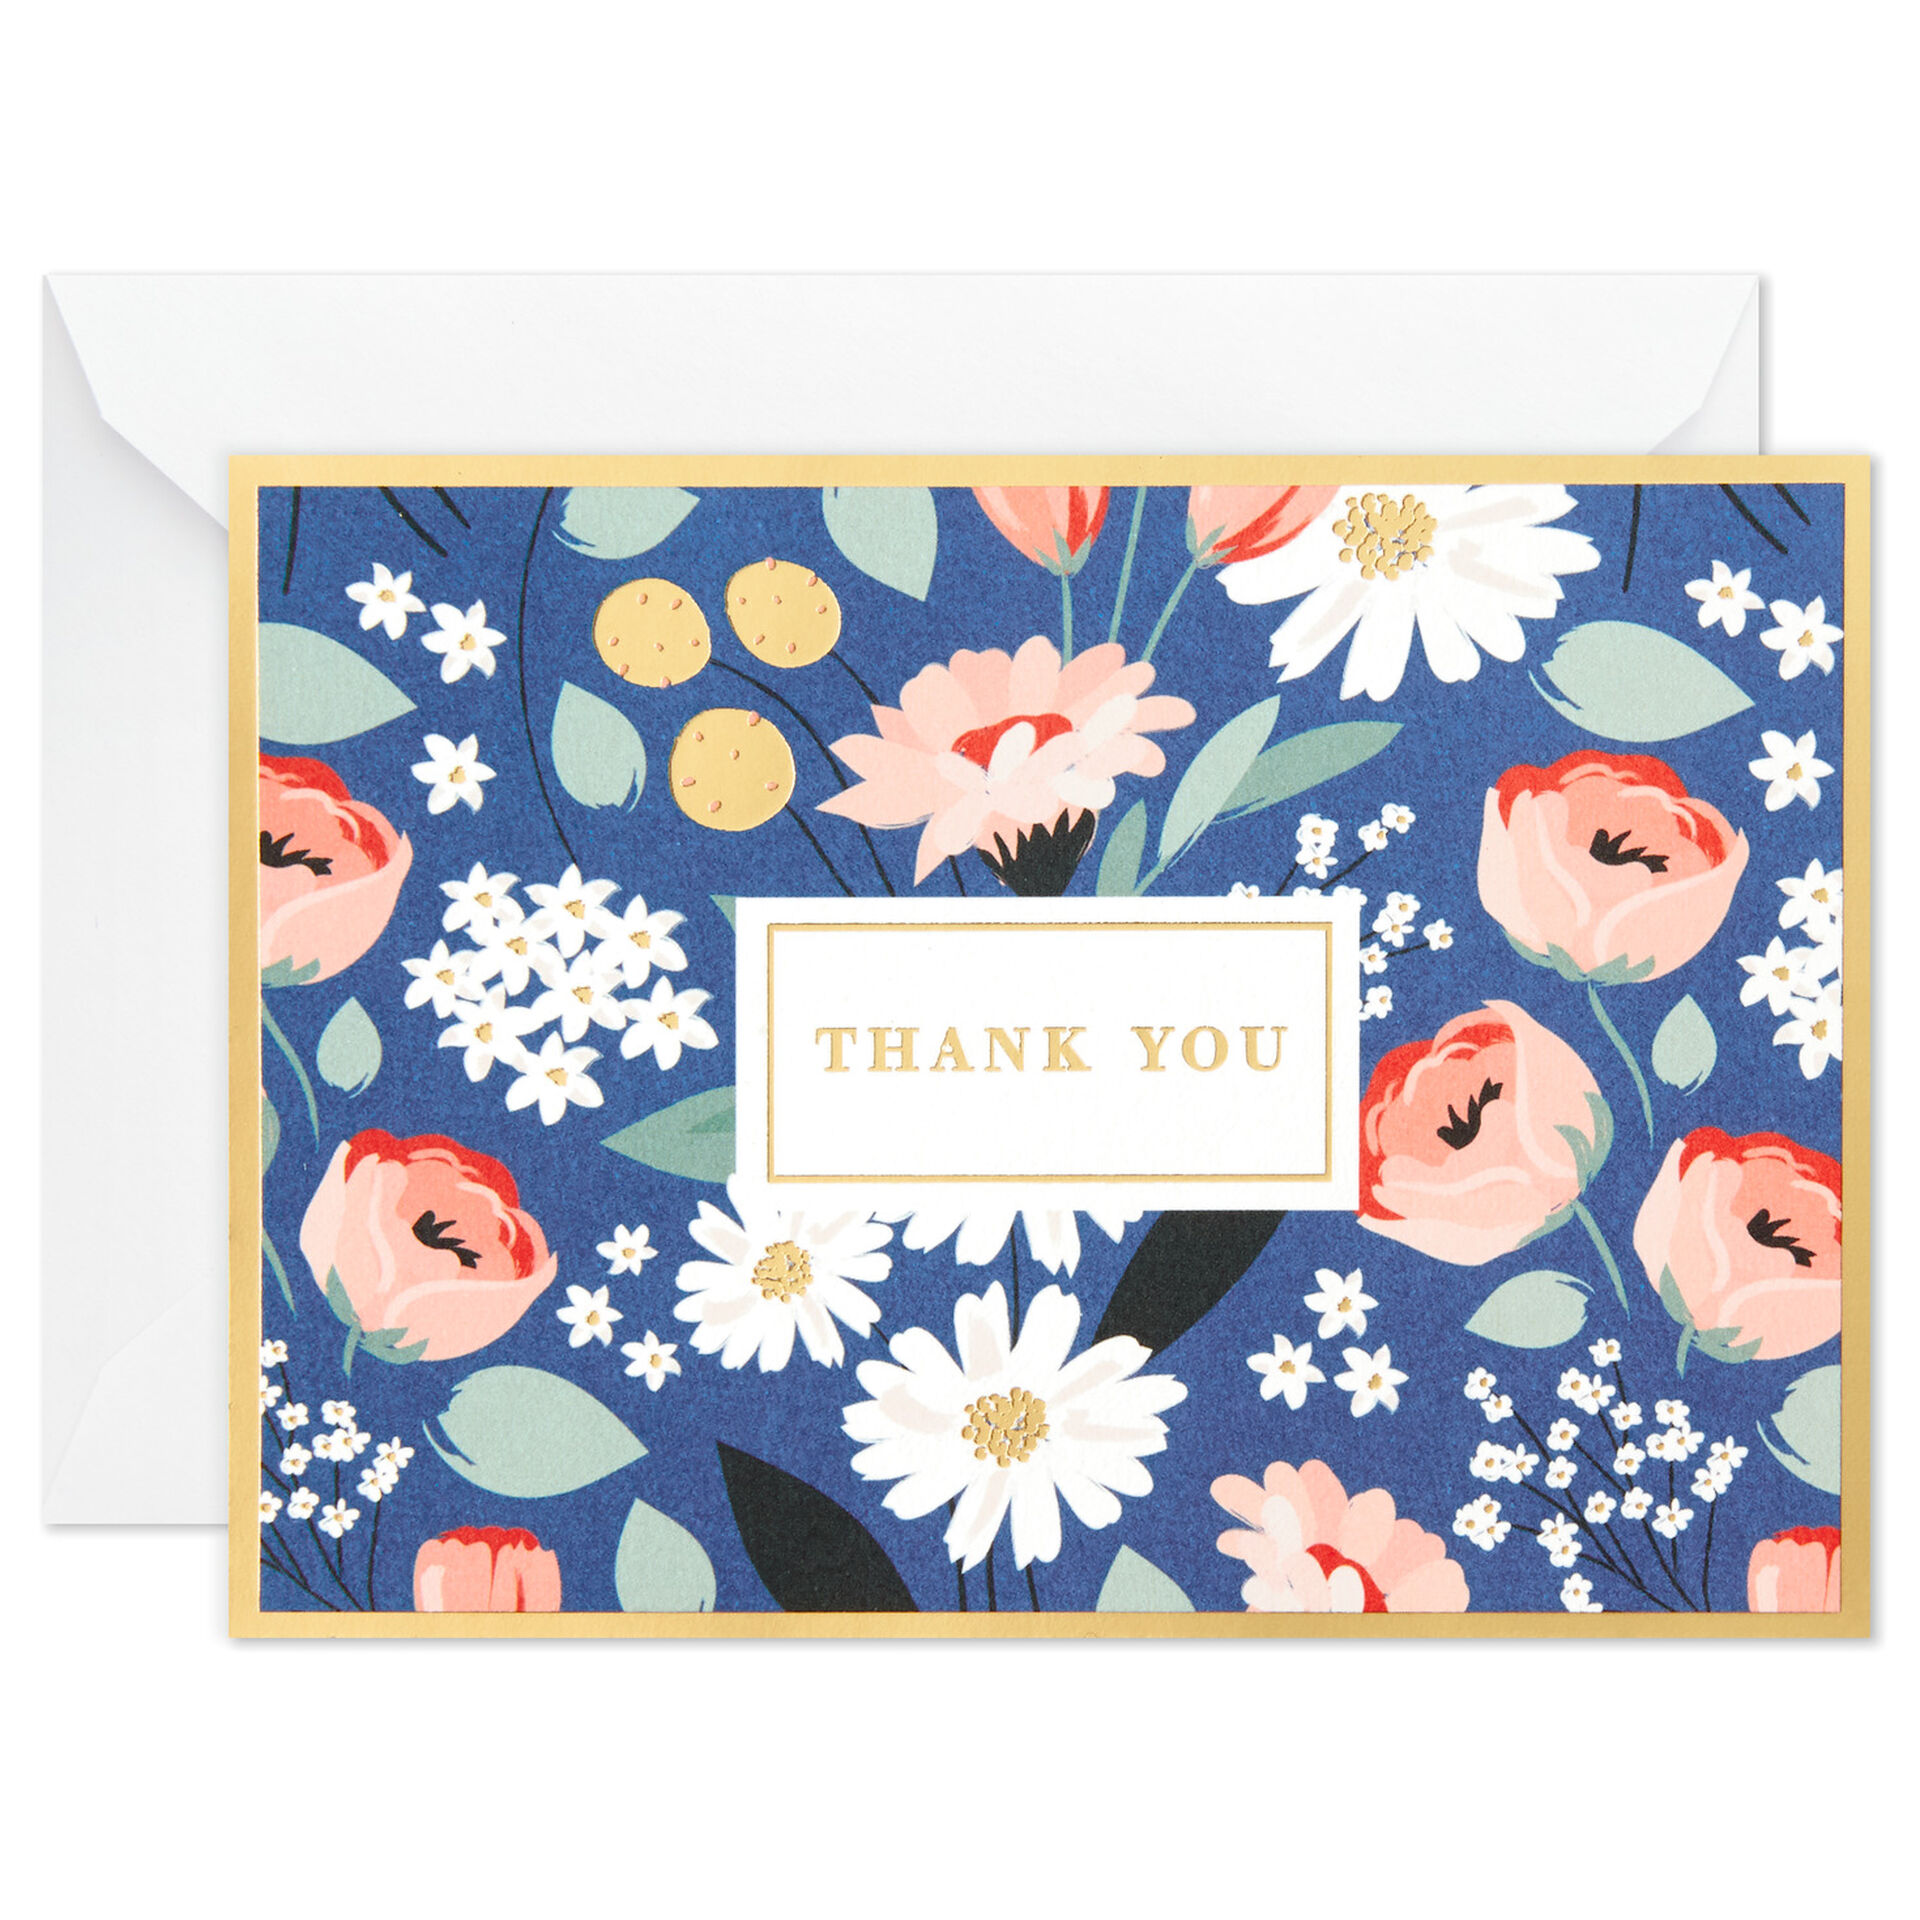 Assorted-Floral-Blank-Note-Cards_1199WTU1020_03